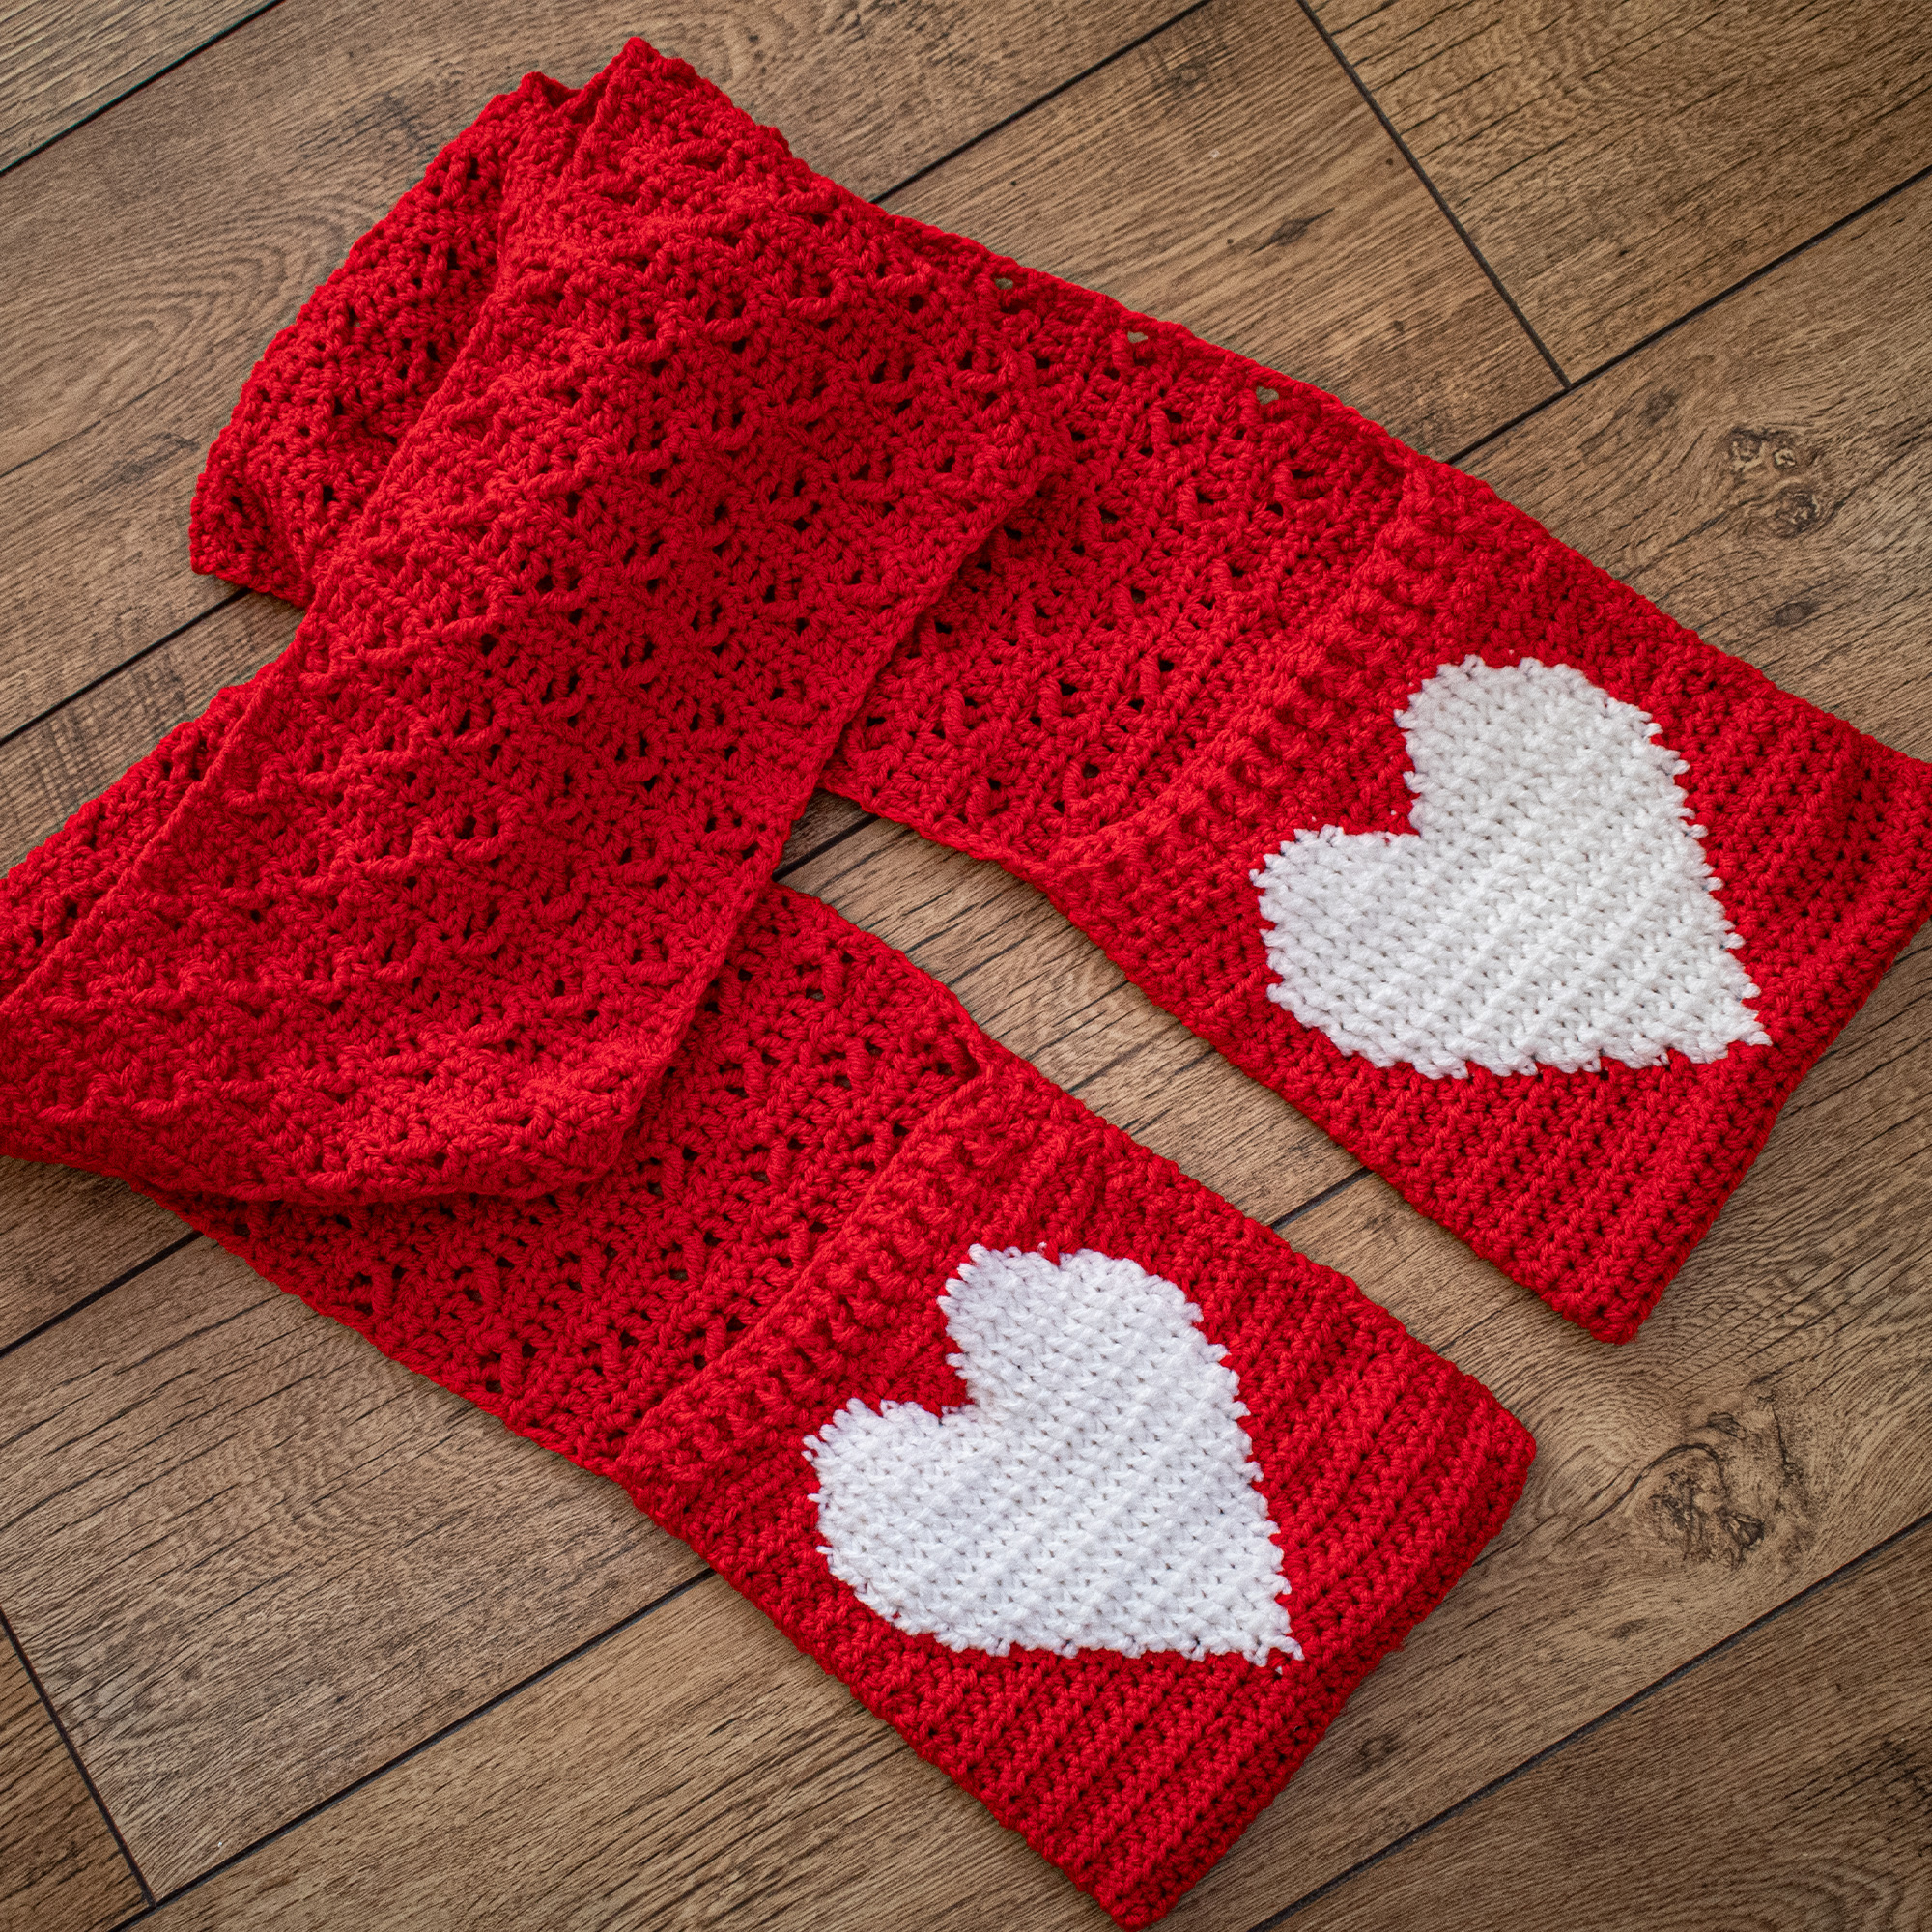 The hearts on this pocket scarf add the perfect finishing touch to this design